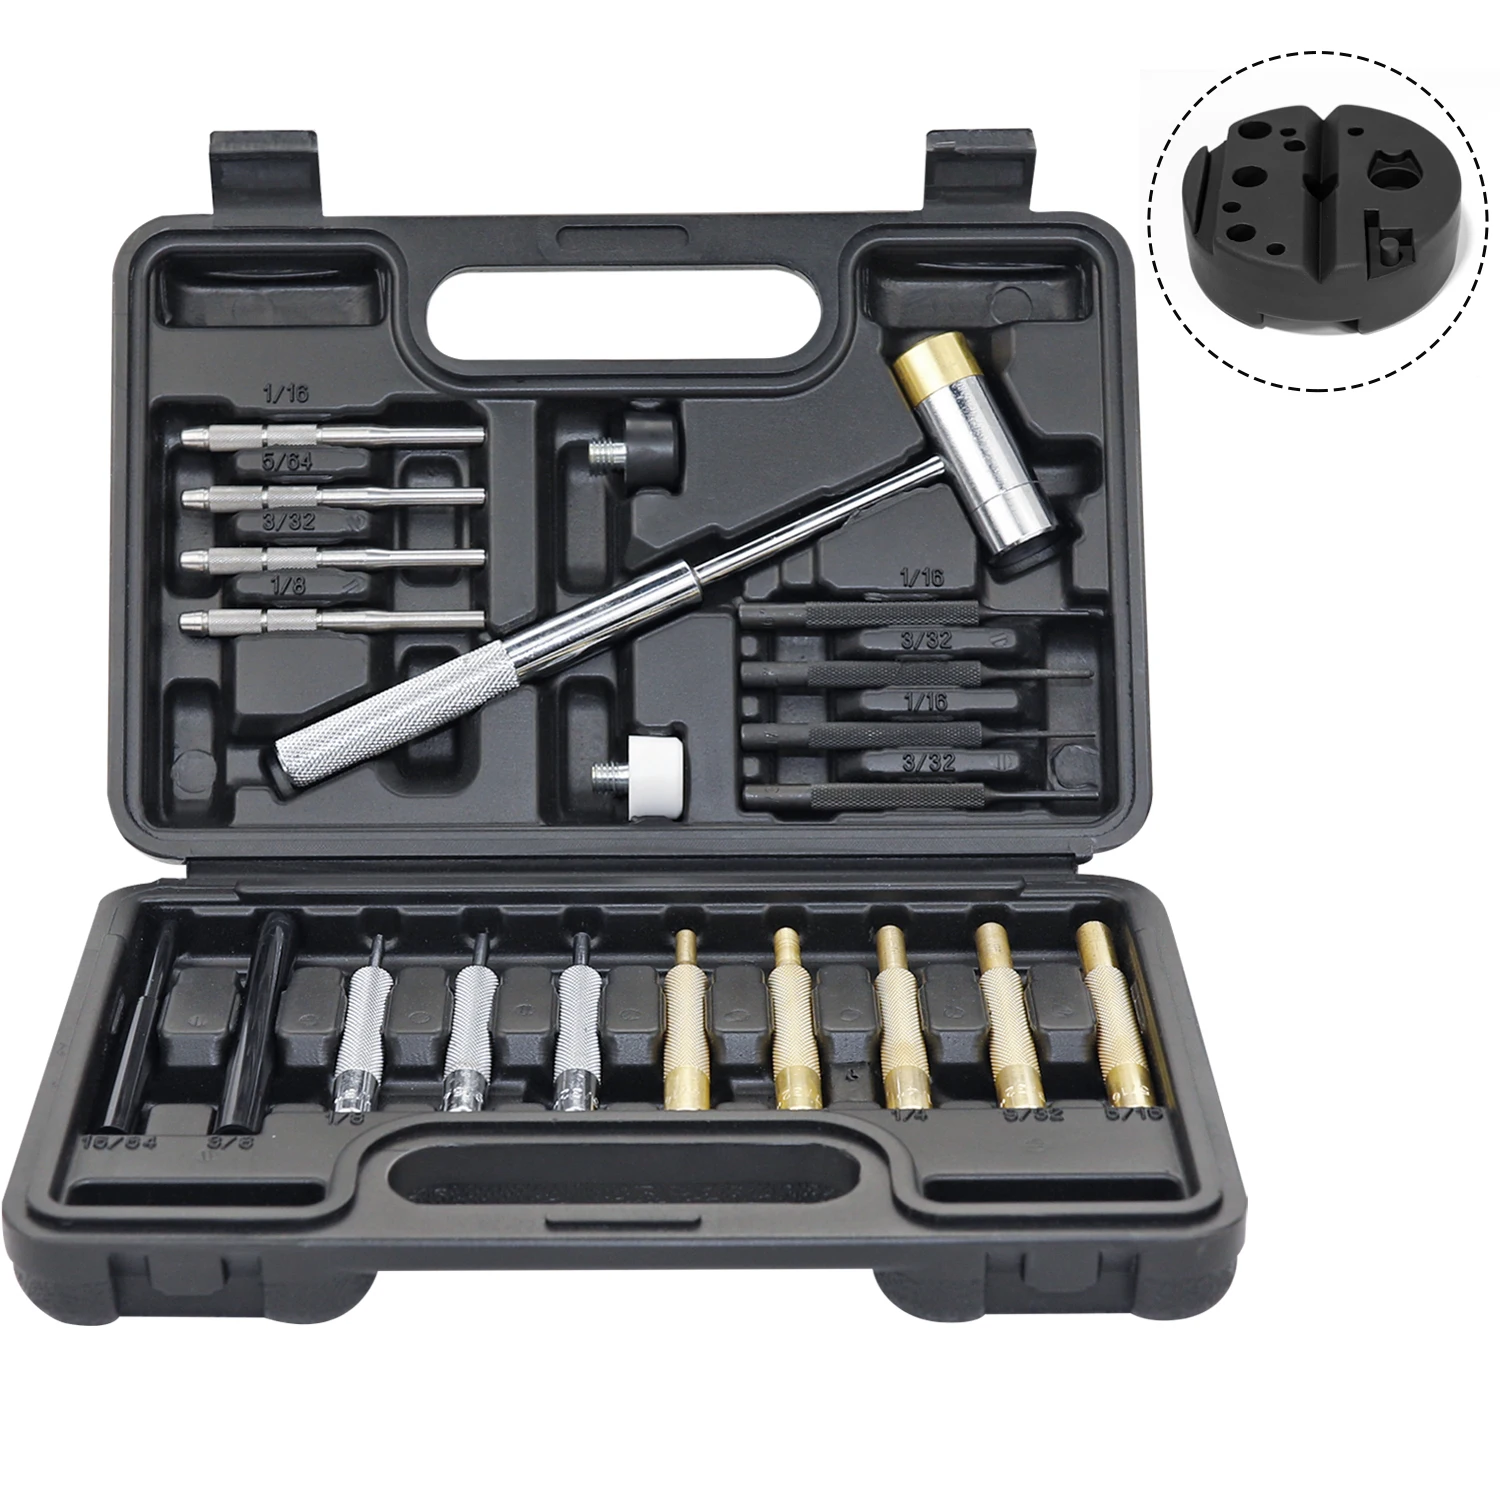 BESTNULE Roll Pin Punch Set, Gunsmithing Punch Tools, Made of Solid Material Including Steel Punch and Hammer with Bench Block